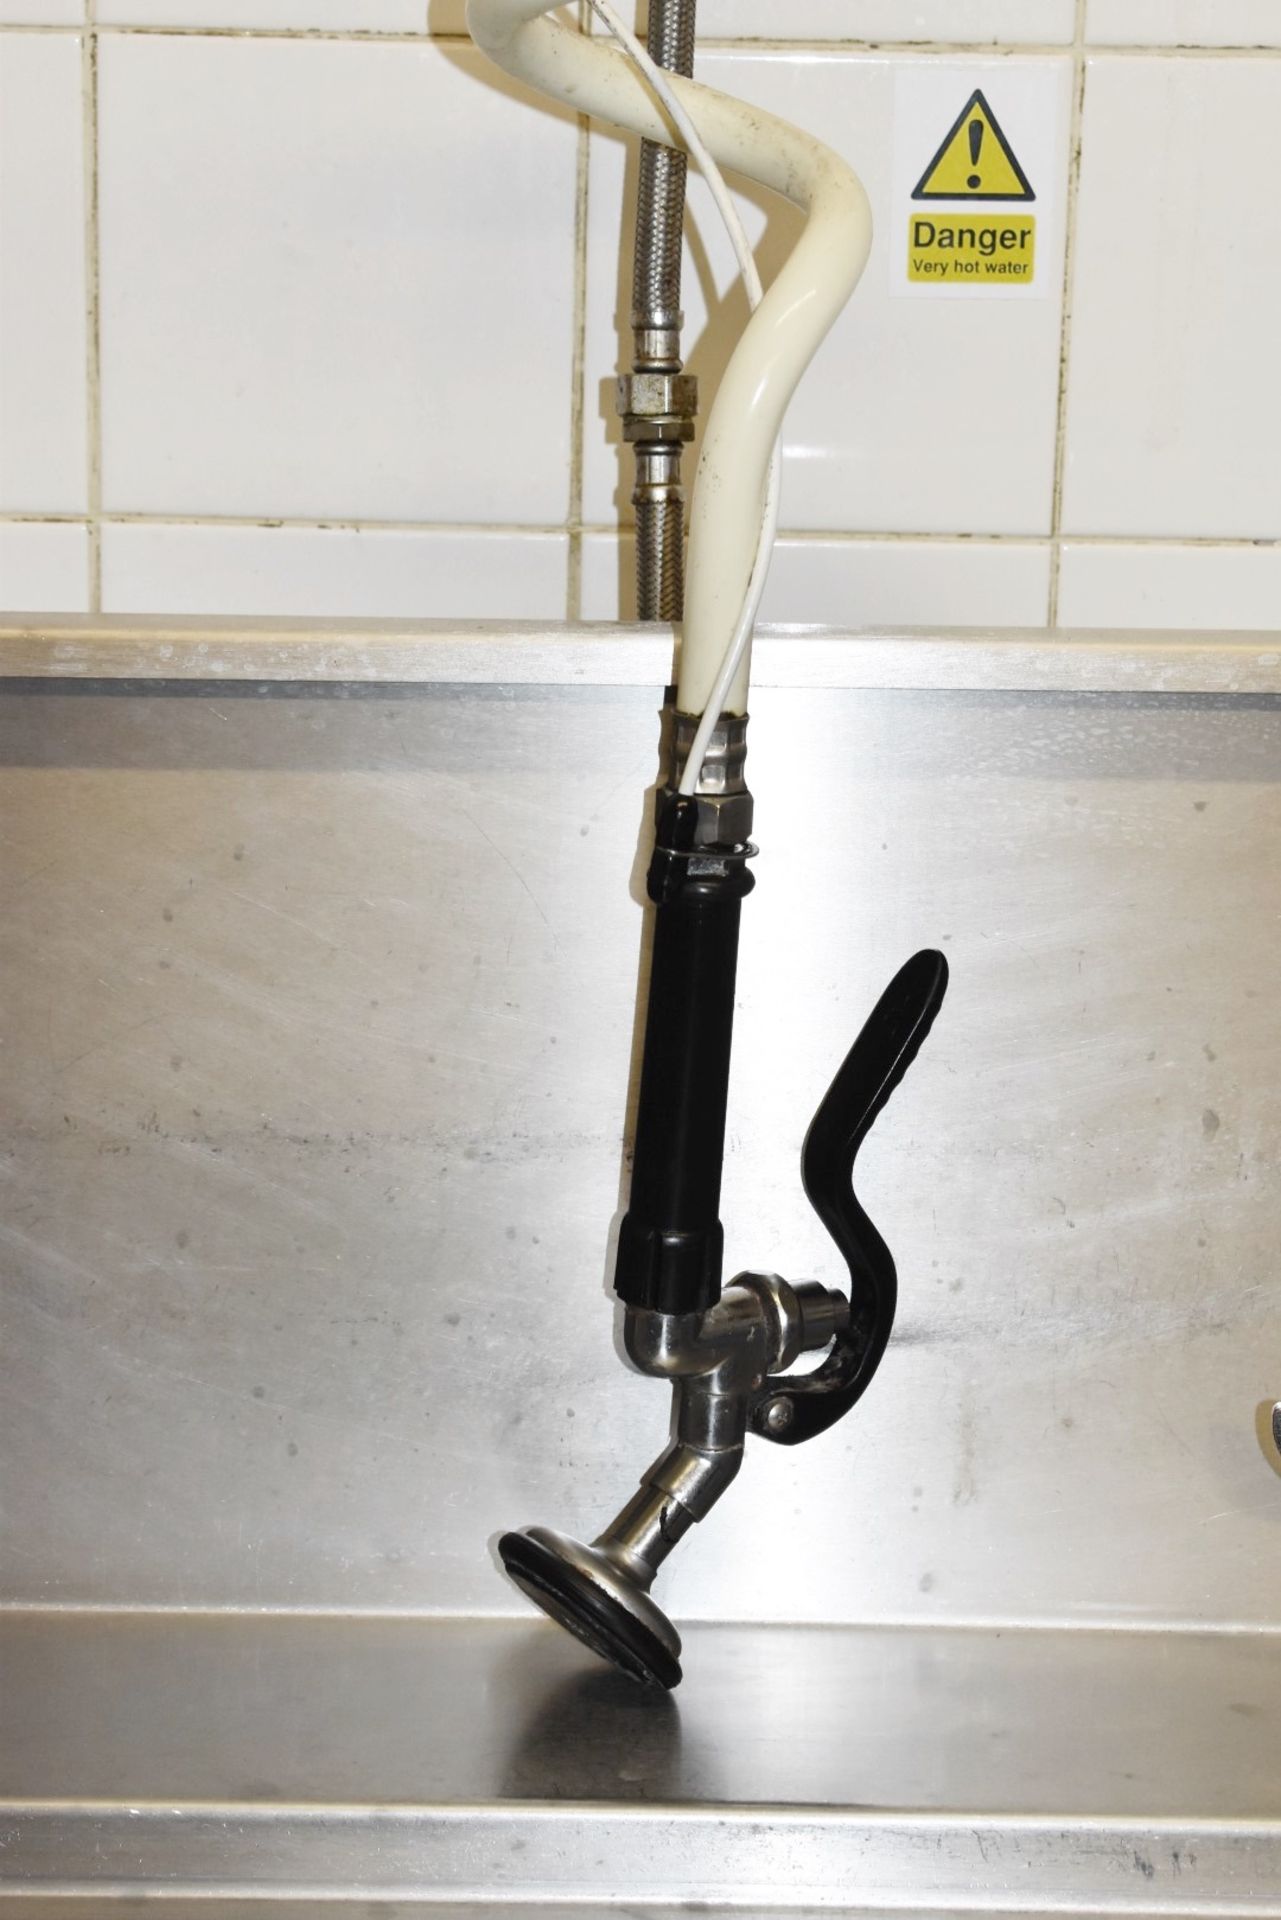 1 x Mechline AJPR 50 Hose Spray Tap For Commercial Kitchen Sinks - Ref C504 - CL461 - Location: - Image 3 of 5